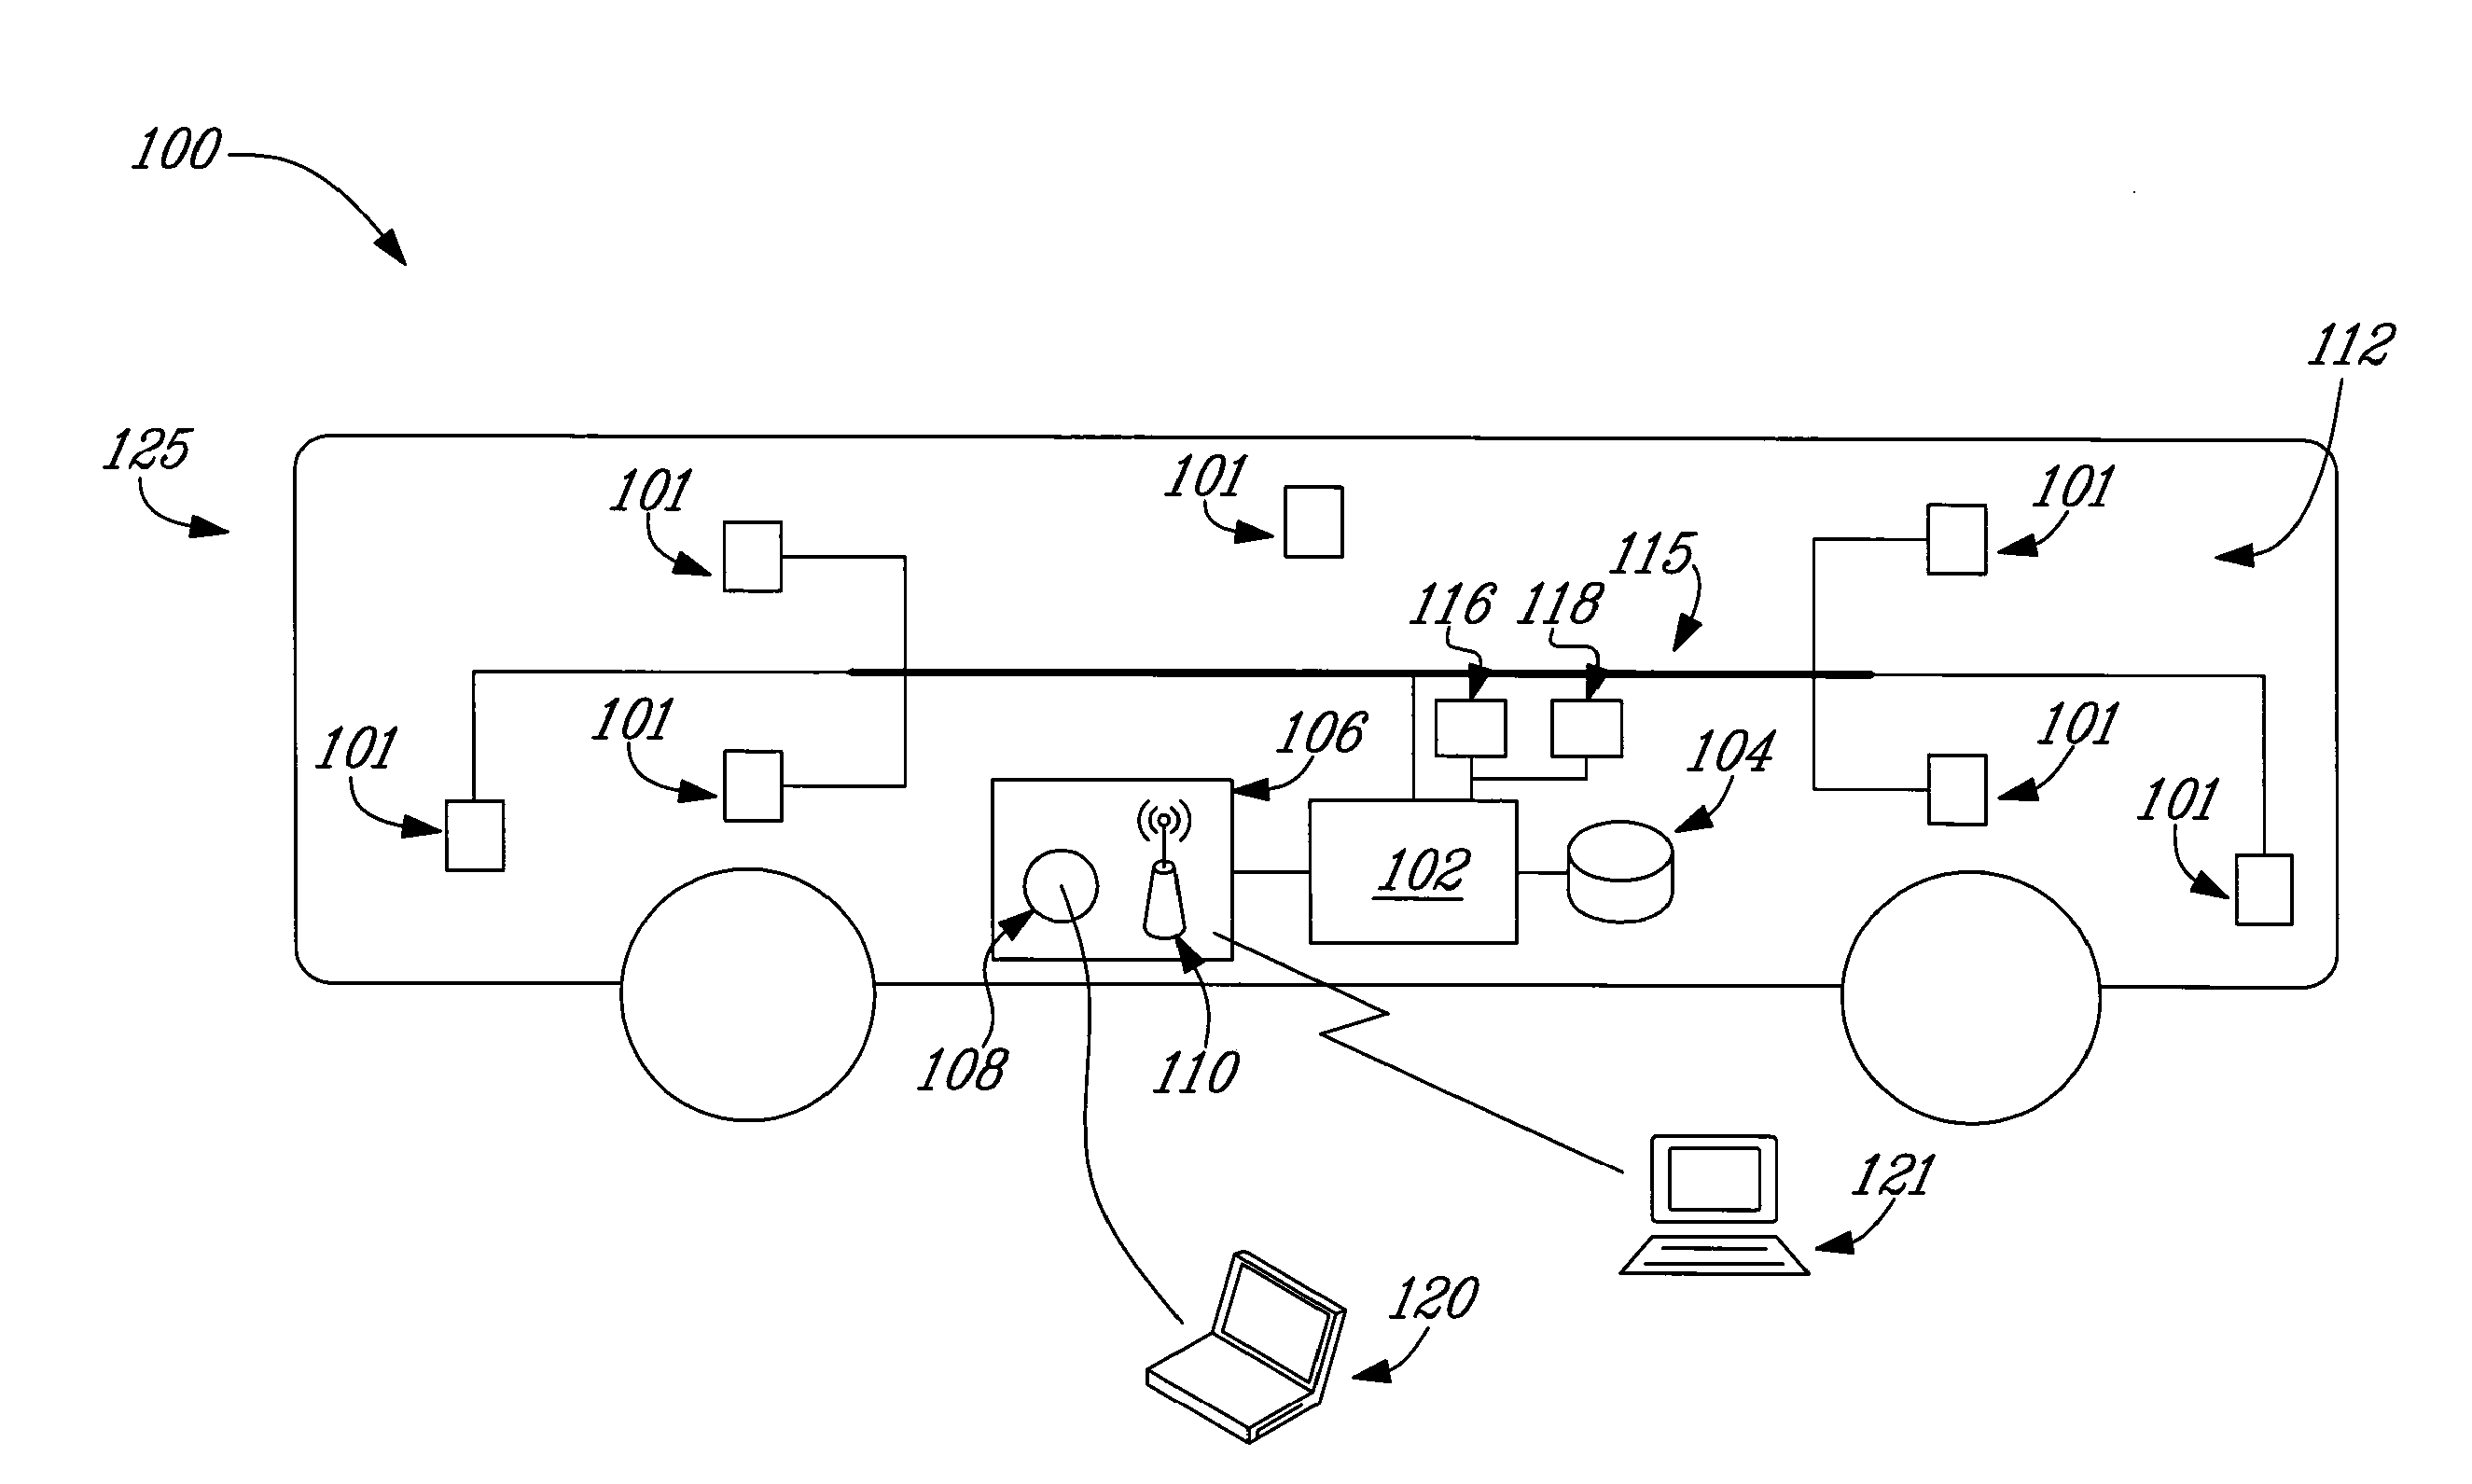 System and method for monitoring operation of vehicles